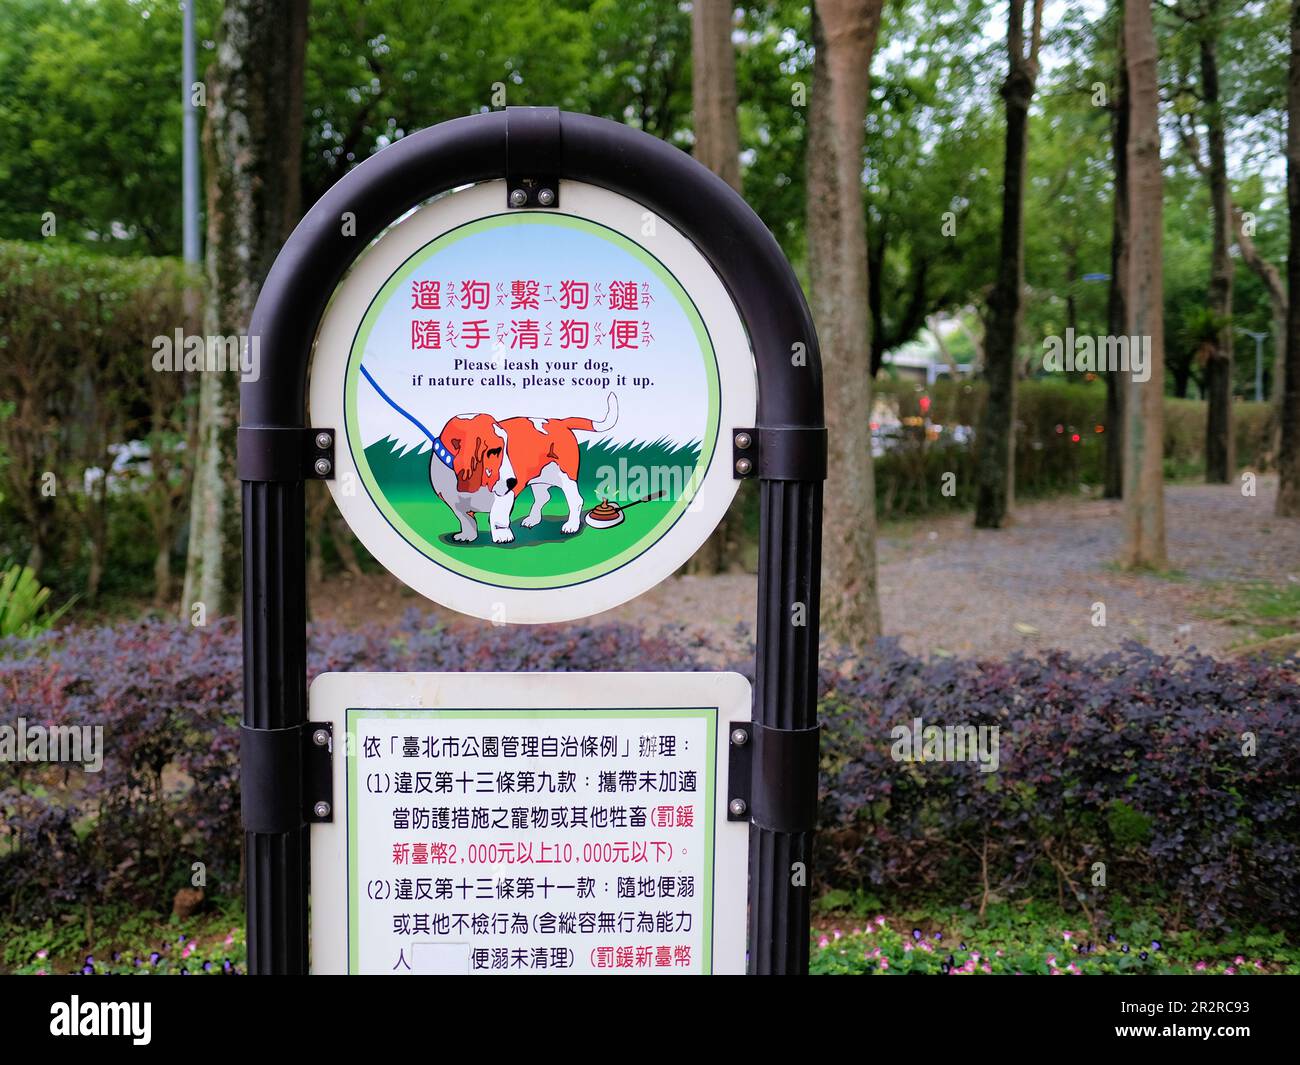 Bilingual sign in English and Chinese asking owners to leash and clean up after their dog; Daan Park Taipei, Taiwan; scoop it up, keep it leashed. Stock Photo